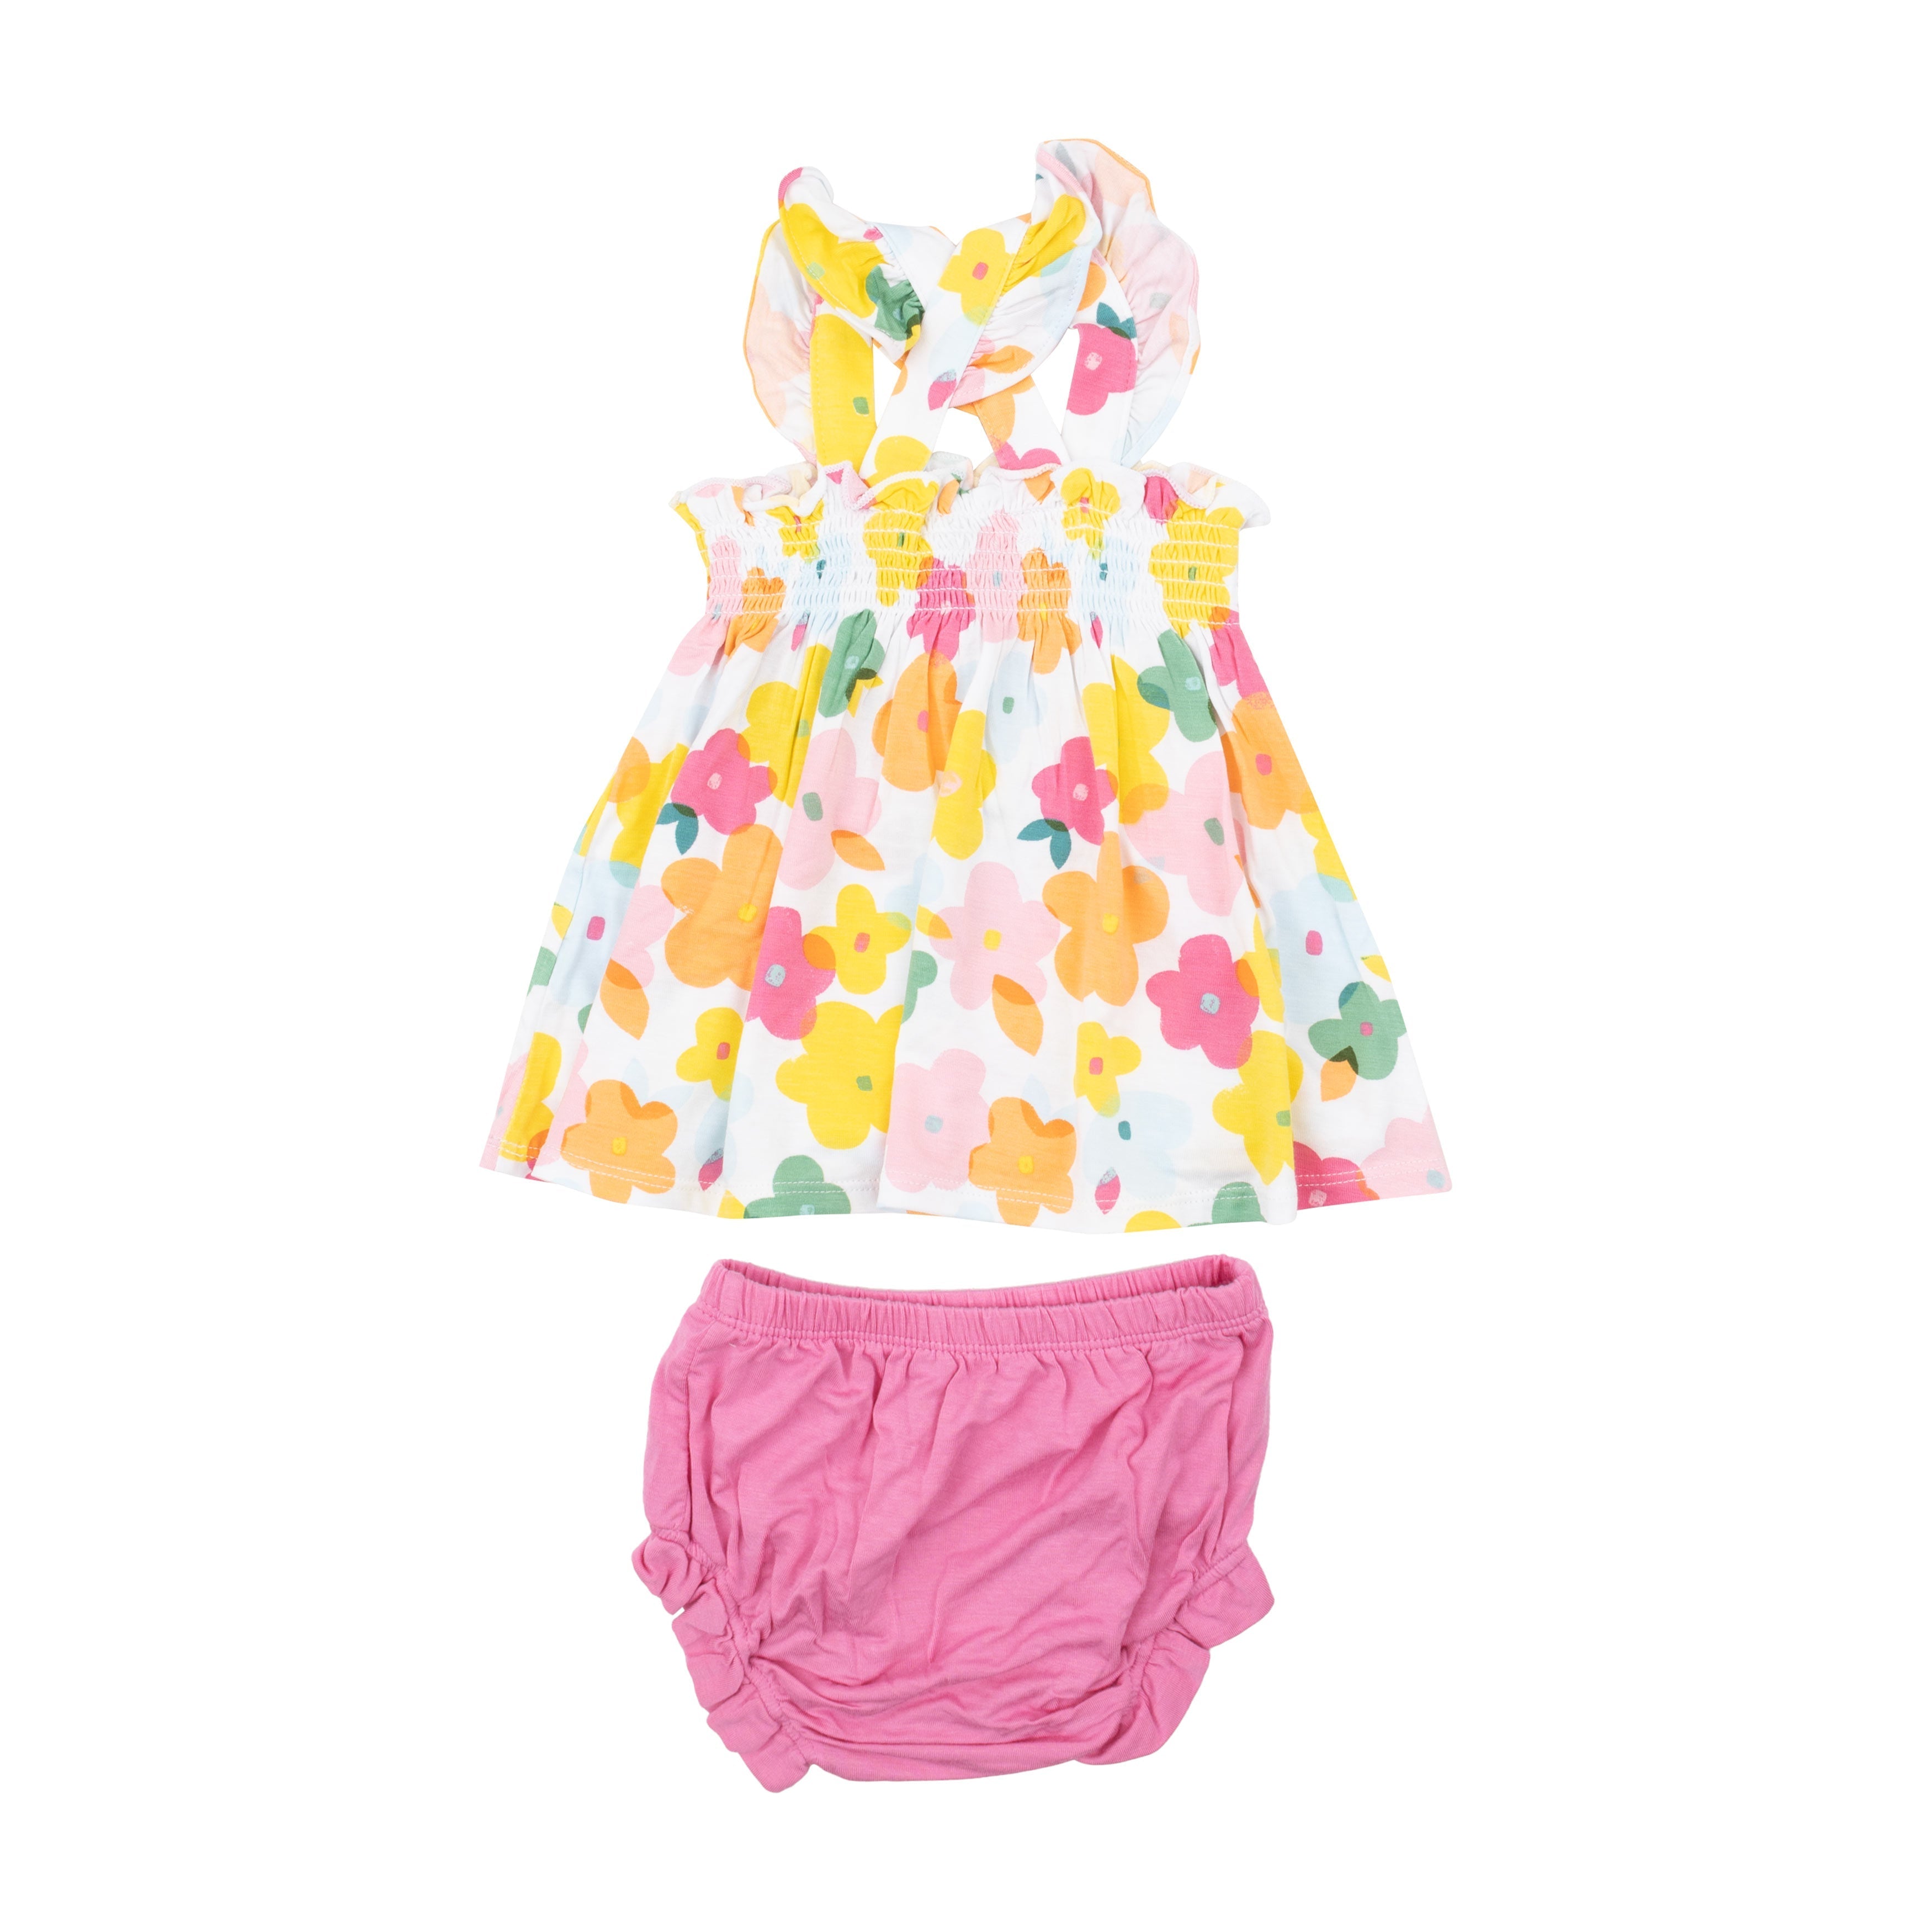 Ruffle Strap Smocked Top And Diaper Cover - Paper Floral